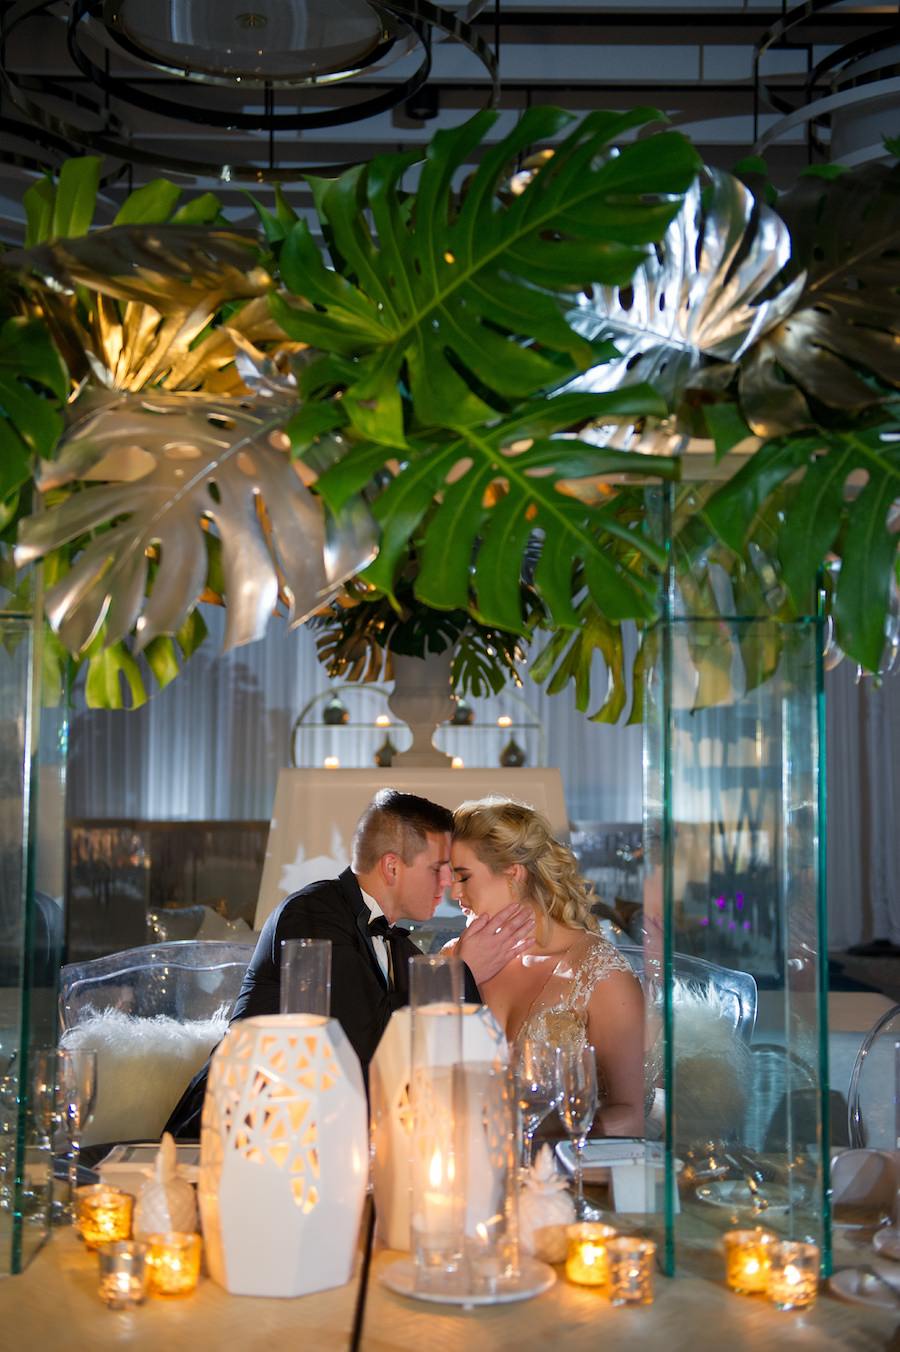 Modern Gold South Beach Inspired Wedding Reception Decor with Tall Palm Leaf Centerpieces, Candles and Gold Linens from Over the Top Linen Rentals | Clearwater Beach Wedding Venue Wyndham Grand | Wedding Planner Parties a la Carte | Andi Diamond Photography